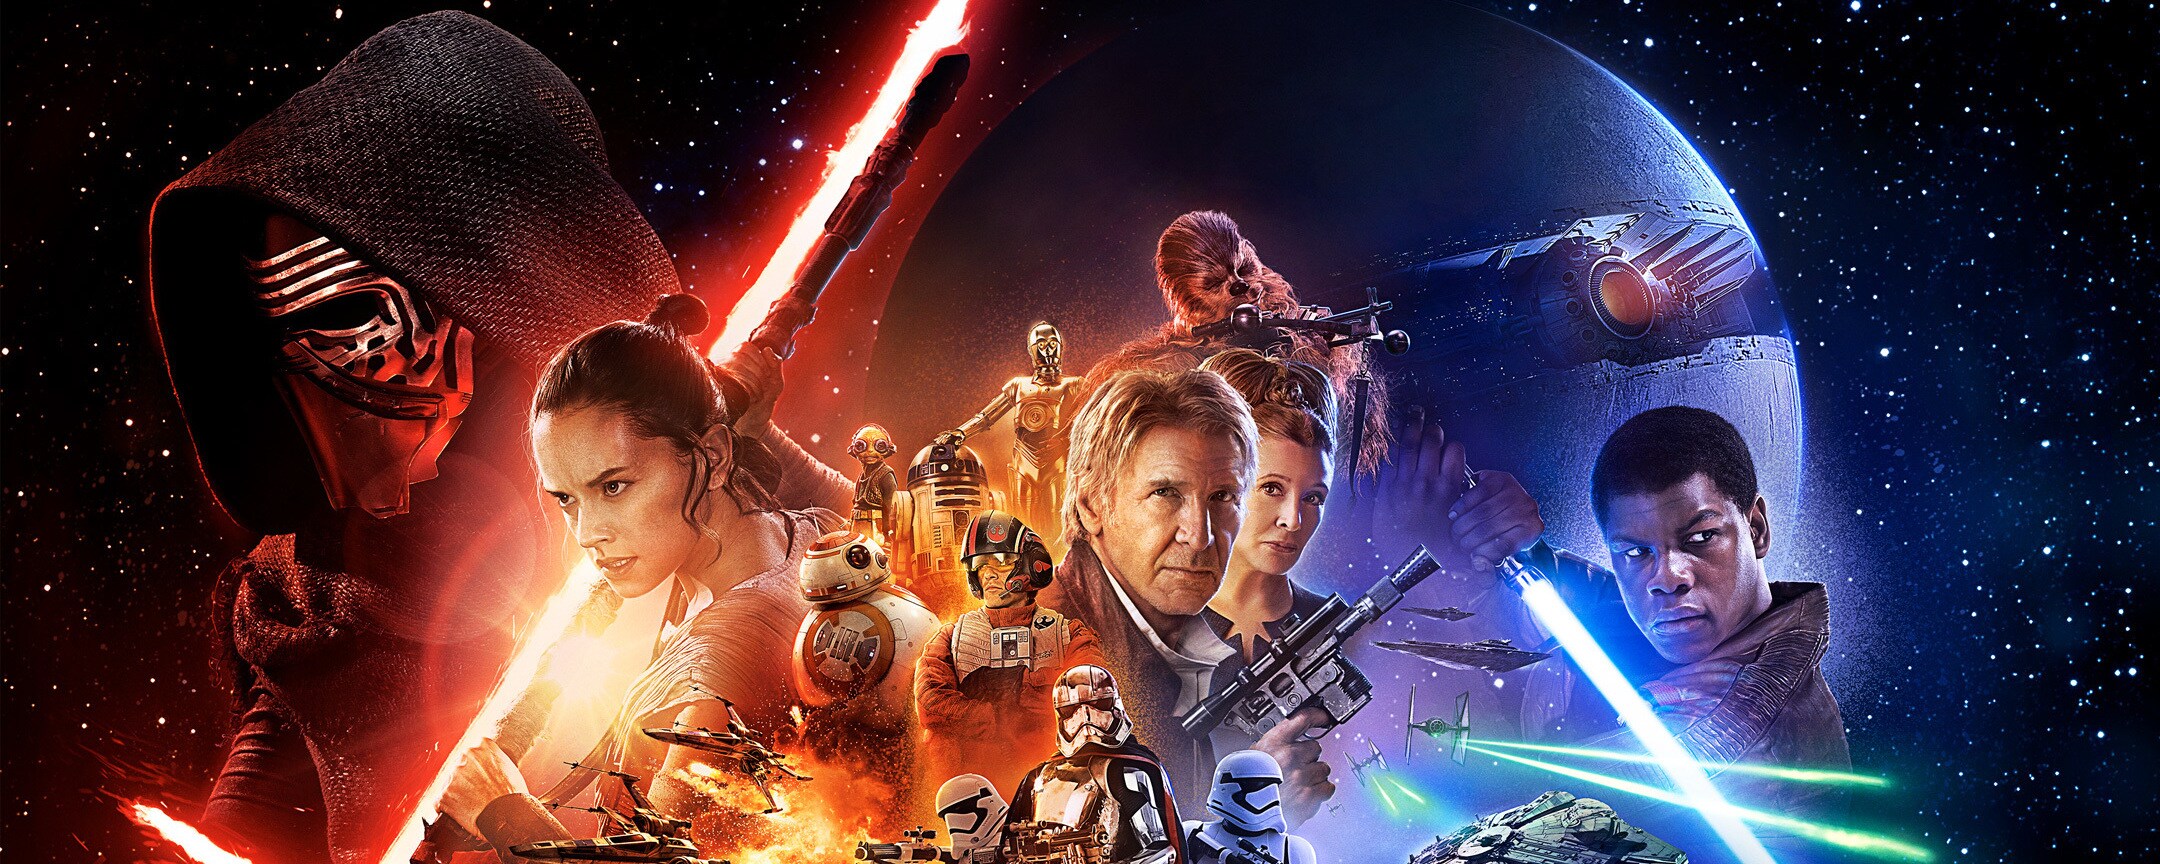 Star Wars: The Force Awakens Theatrical Poster First Look, In-theater  Exclusives and More